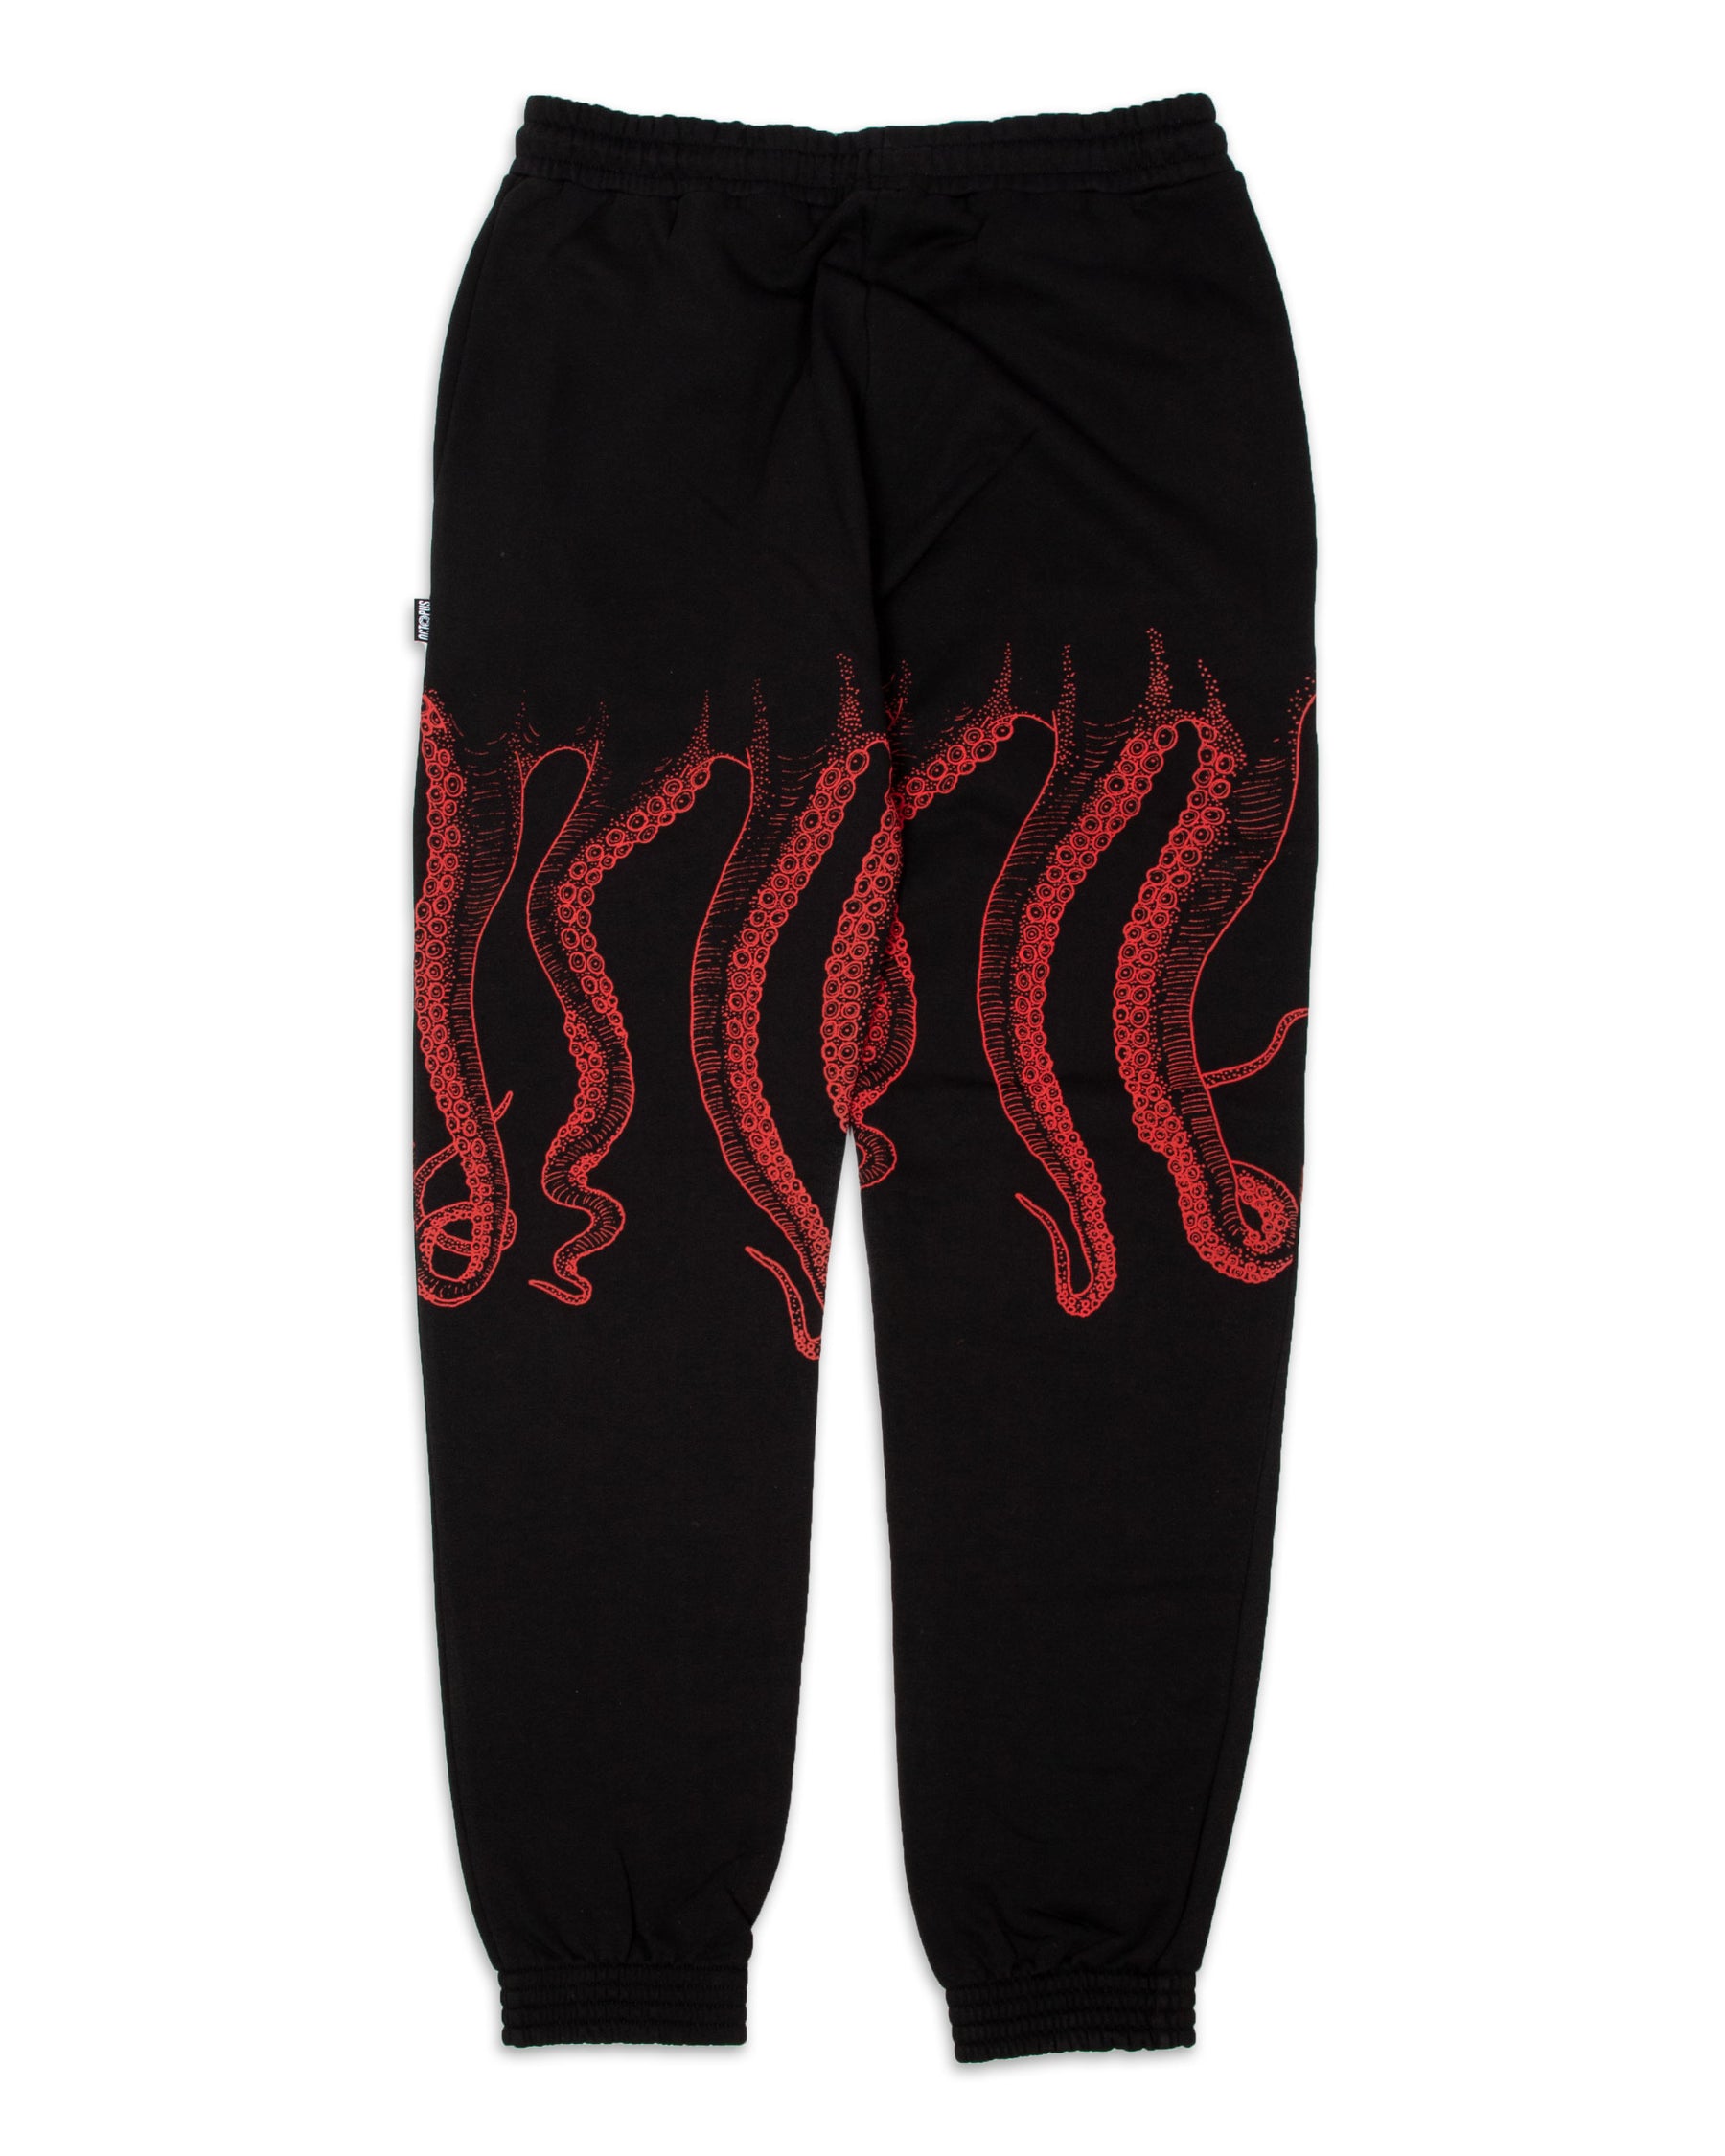 Octopus Outline Trouser 21WOSP03-Nero